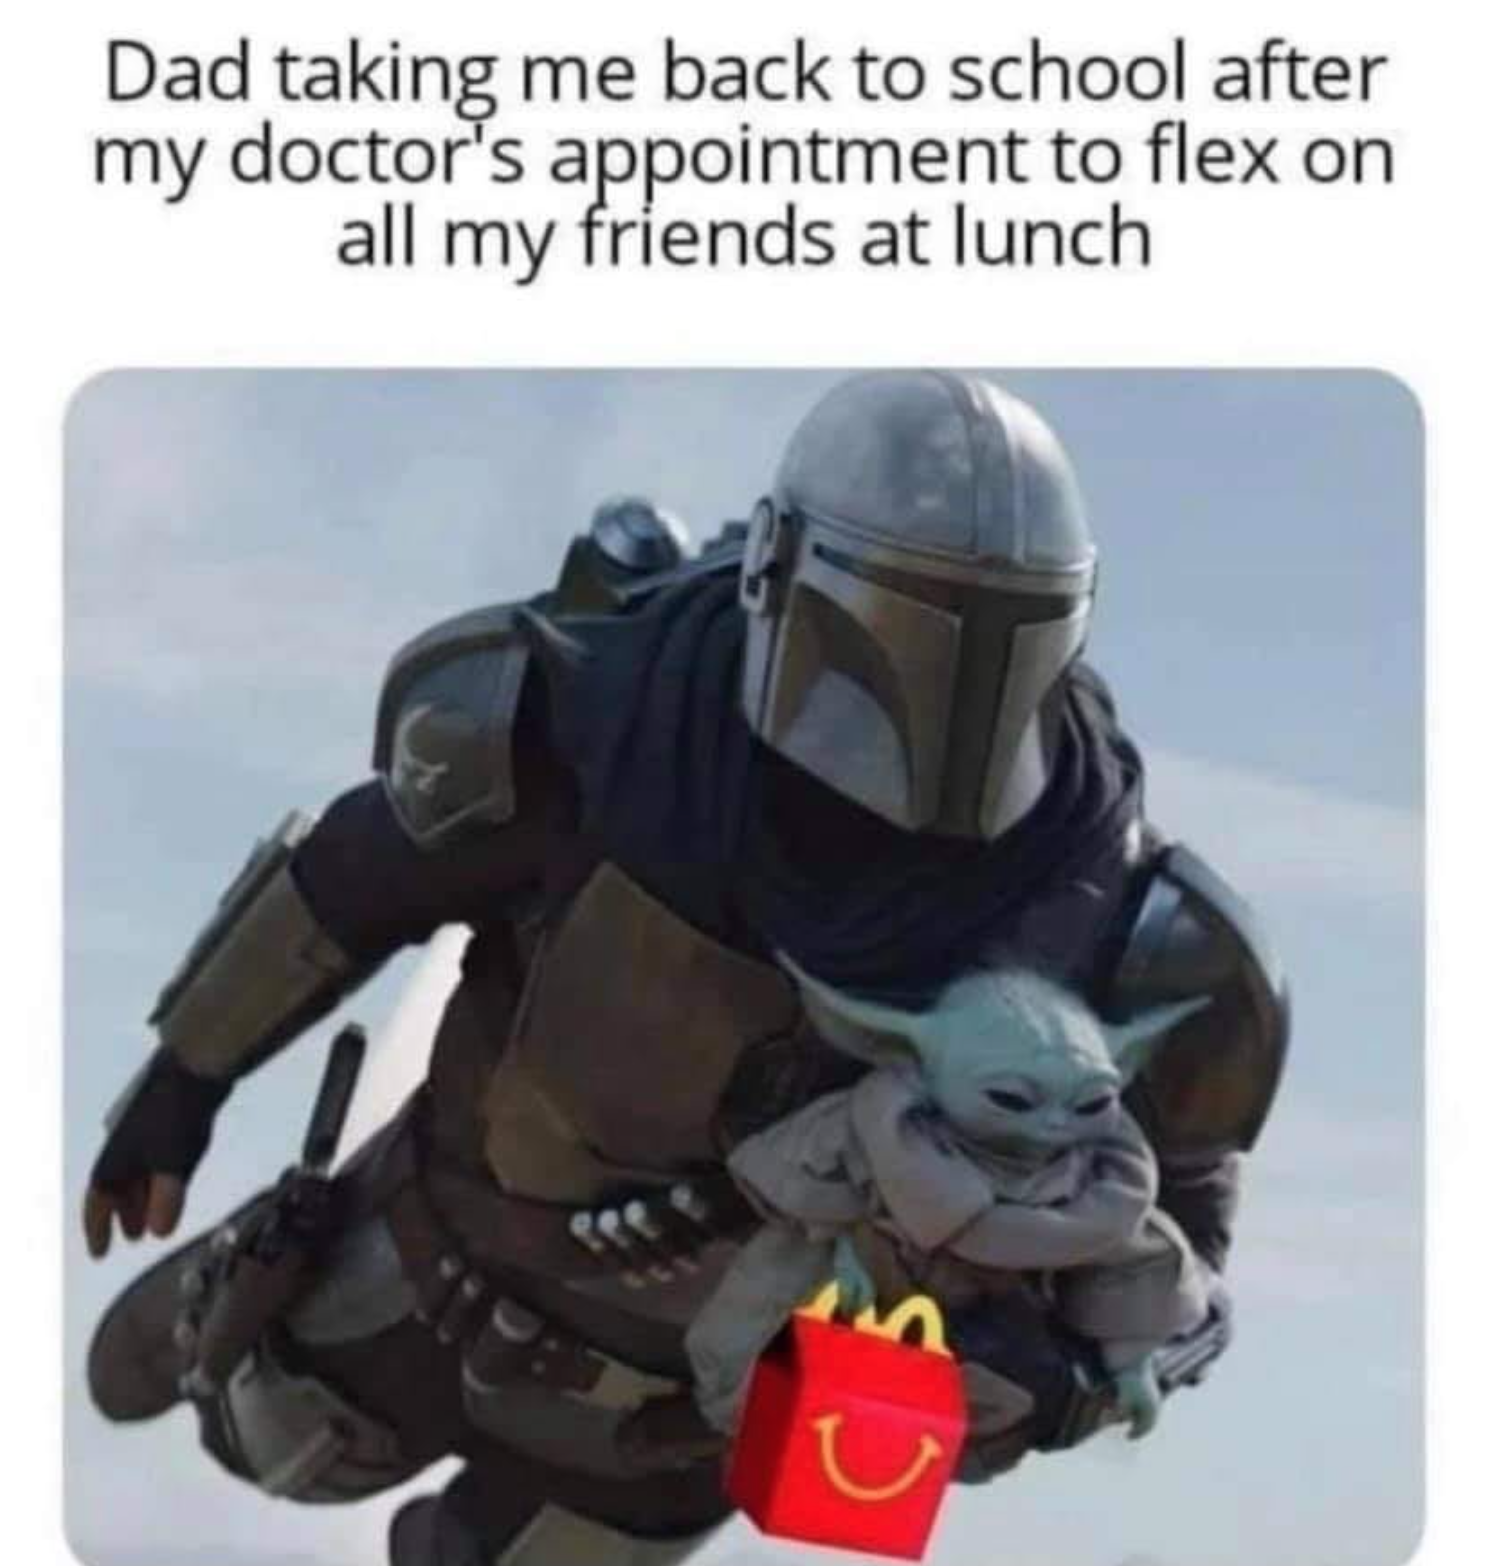 mandalorian season 2 episode 6 - Dad taking me back to school after my doctor's appointment to flex on all my friends at lunch